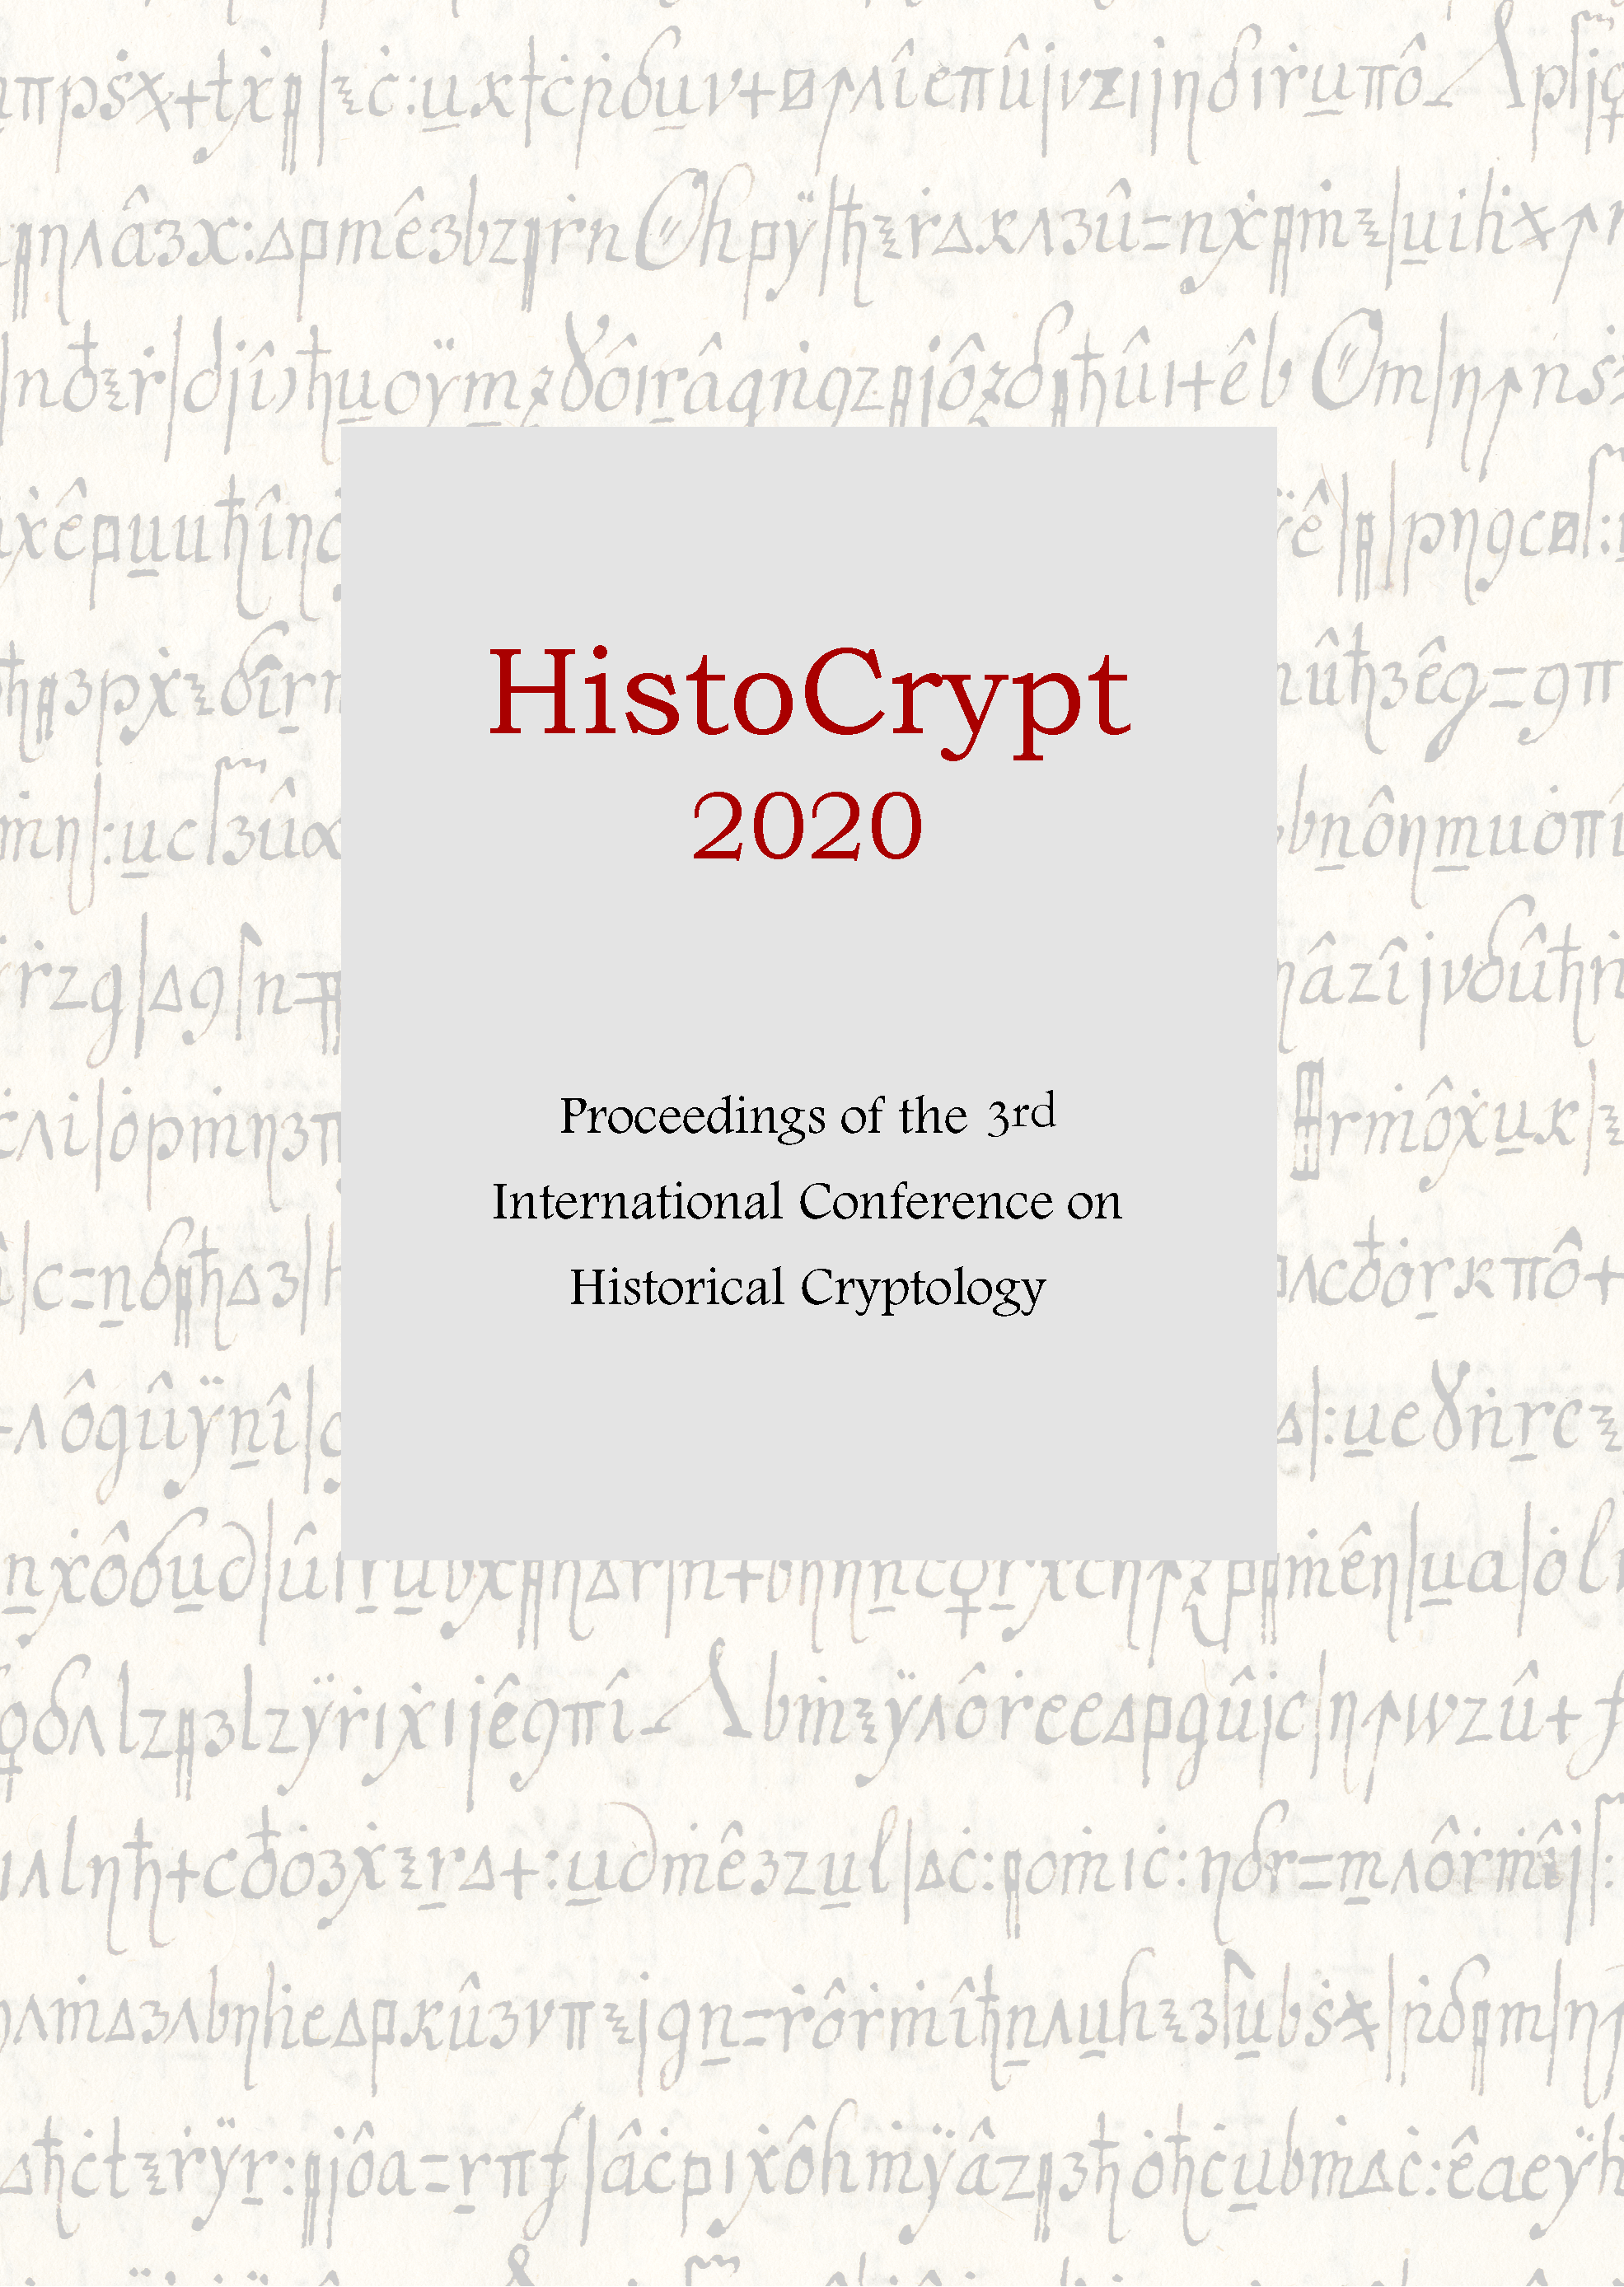 					View Proceedings of the 3rd International Conference on Historical Cryptology HistoCrypt 2020
				